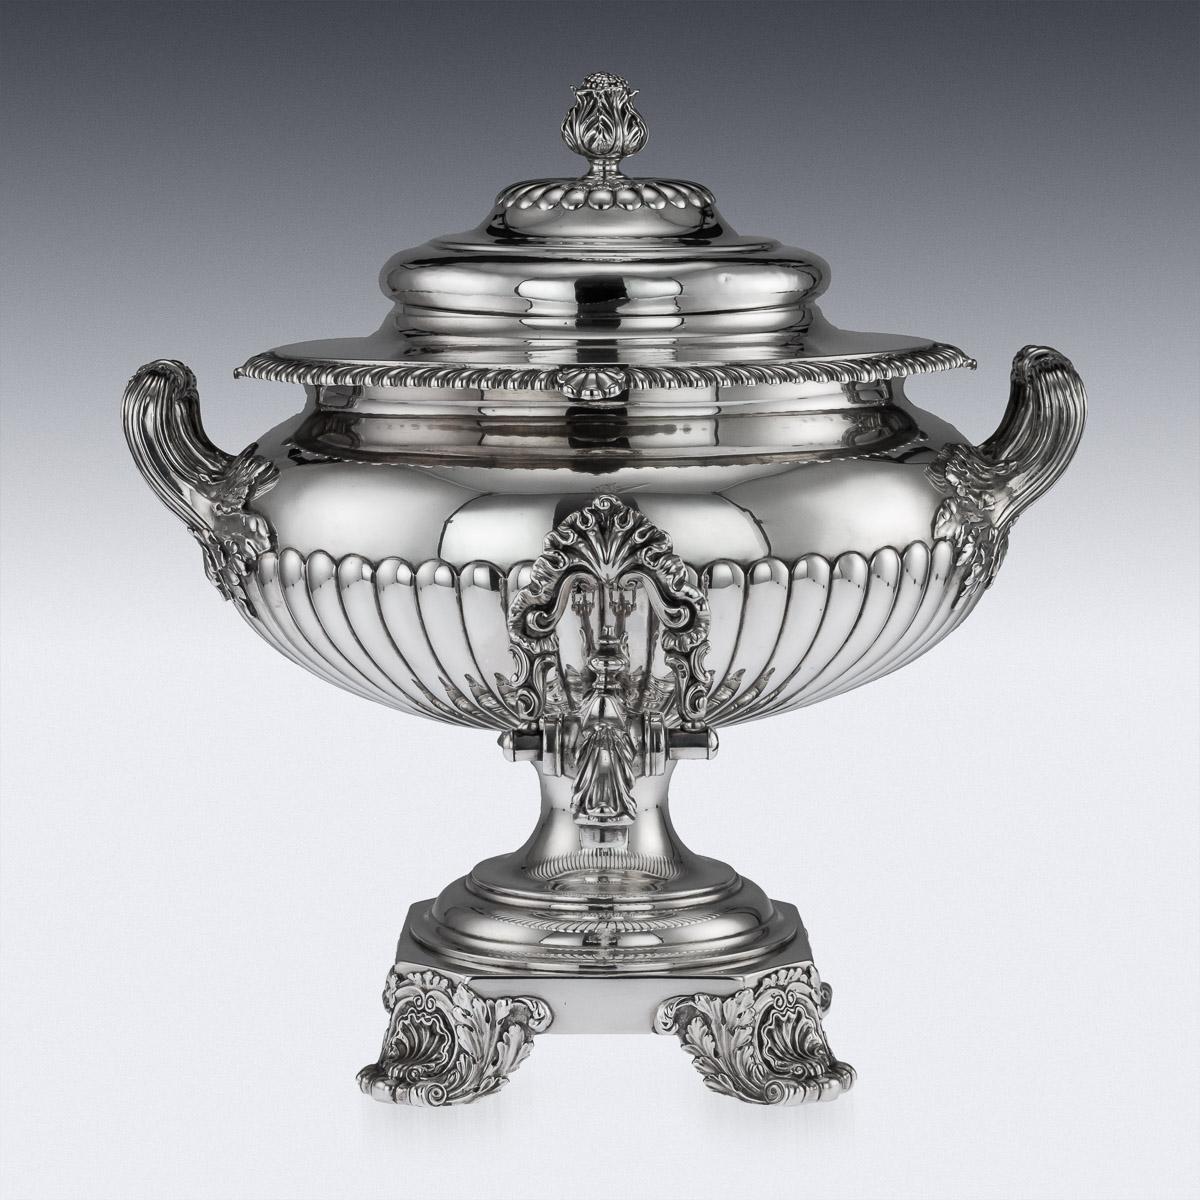 Description

Antique 19th Century Georgian exceptional solid silver hot water samovar, of squashed bulbous form with reeded decoration, on a square base, standing on cast scroll and shell feet, applied with twin acanthus leaf handles, a hot water